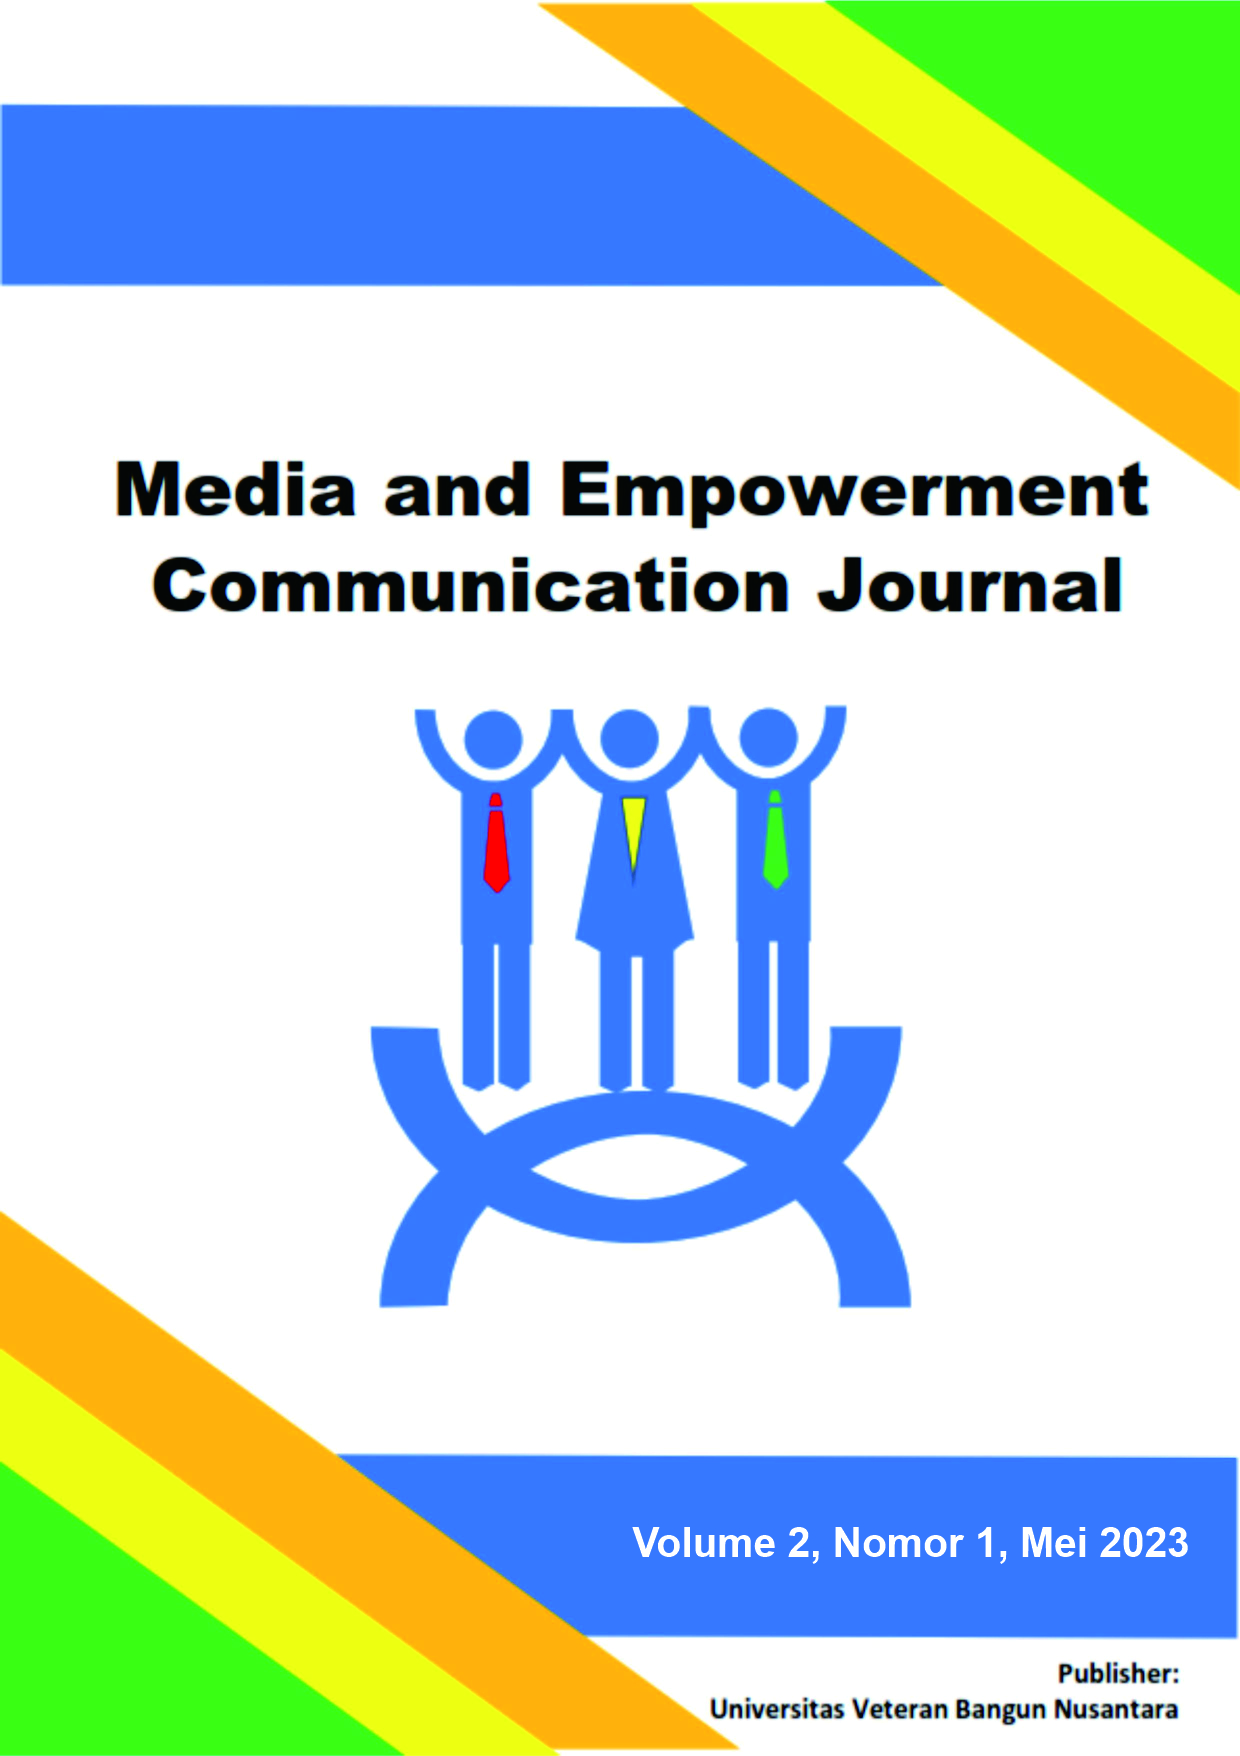 					View Vol. 2 No. 1 (2023): Media and Empowerment Communication Journal
				